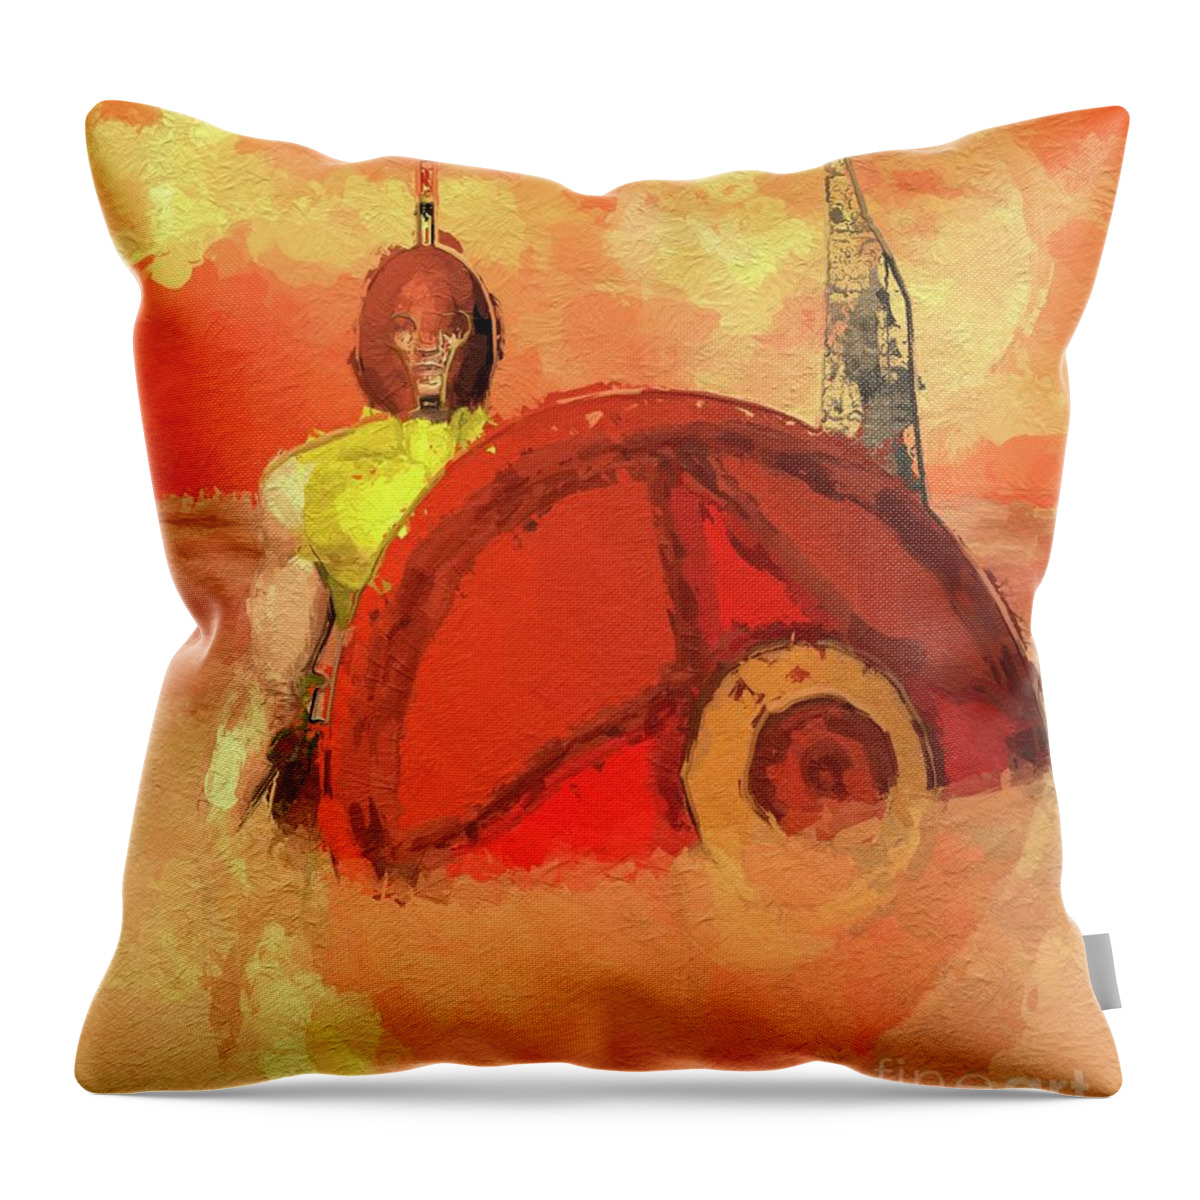 Troy Throw Pillow featuring the digital art Troy Has Fallen by Esoterica Art Agency